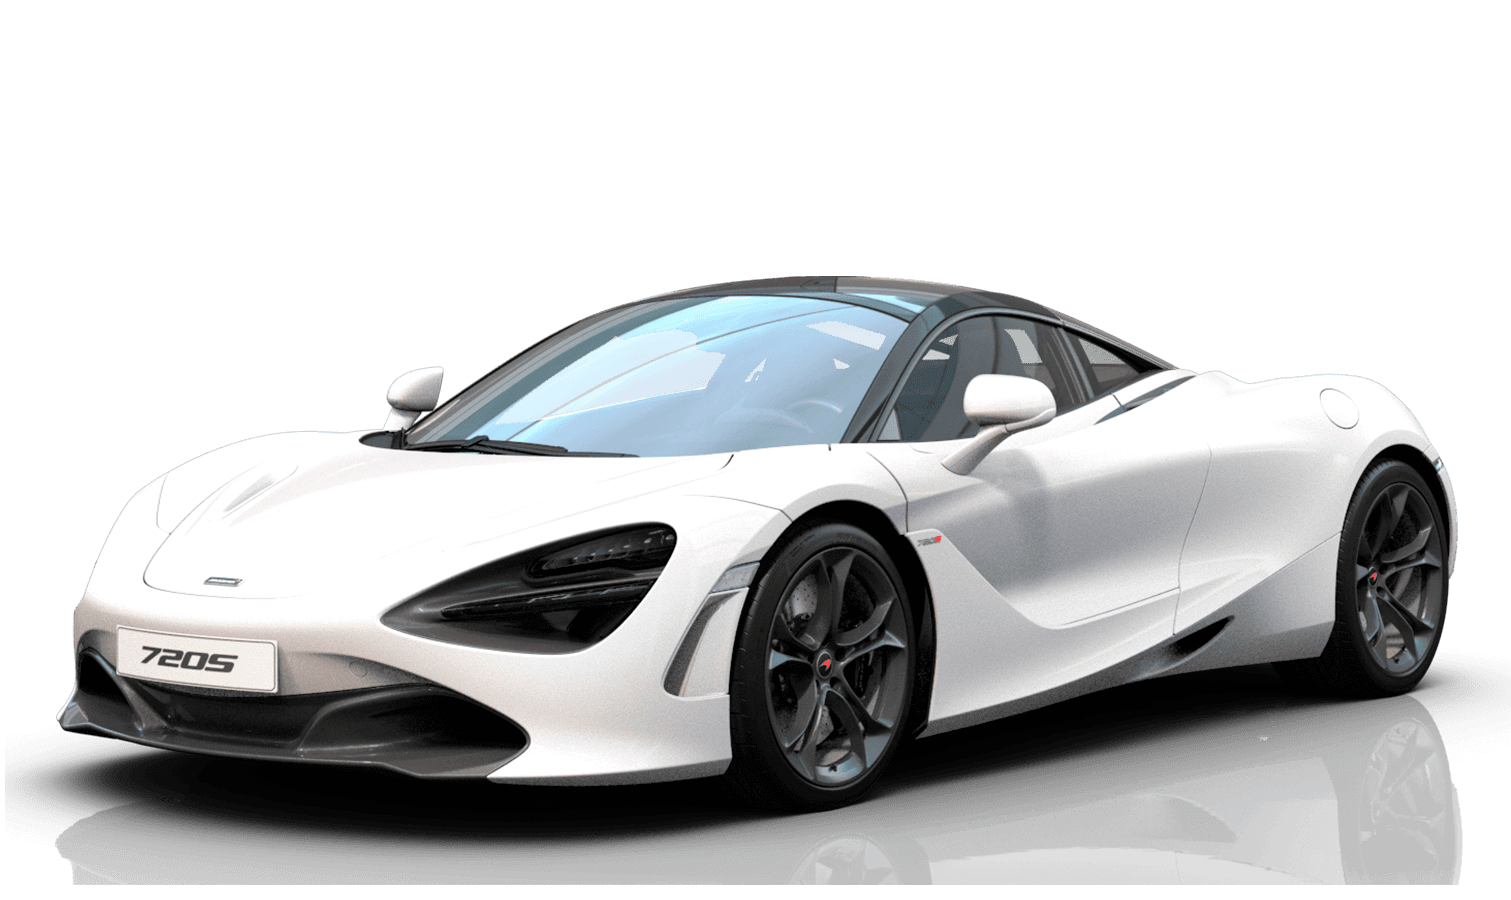 McLaren 720S Jancars, High-end, sports and luxury car rental